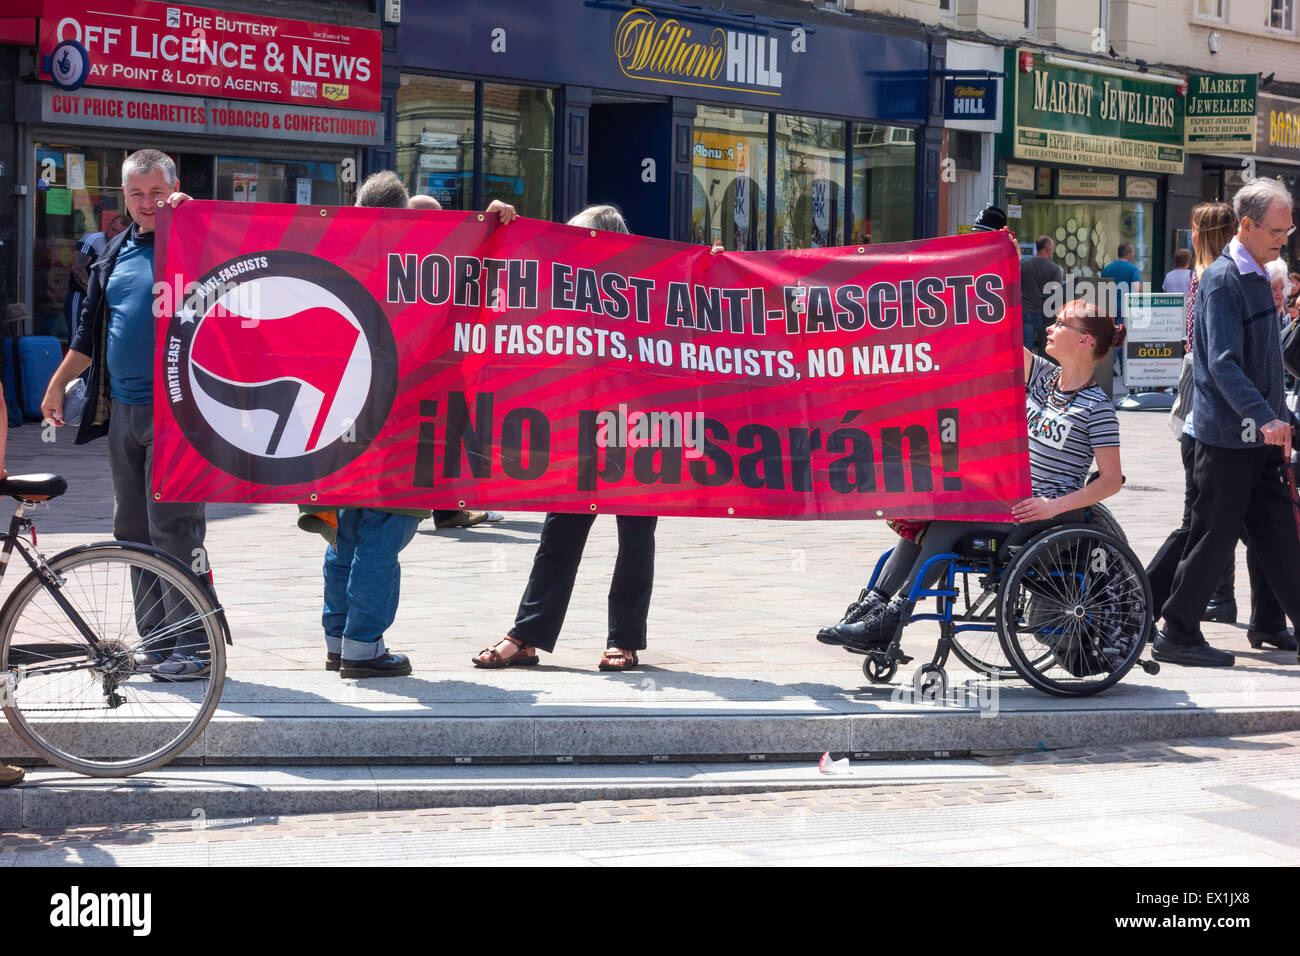 Stockton-on-Tees County Durham 4th July 2015,  A counter-demonstration by the  North East Anti-Fascists against a public demonstration by Far Right Anti-Muslim Groups 'North East Infidels' and 'North West Infidels' was held in the town centre today. Banner Redas 'North East Anti Fascists, No Fascists, No Racists, No Nazis No Pasaran! Credit:  Peter Jordan NE/Alamy Live News Stock Photo